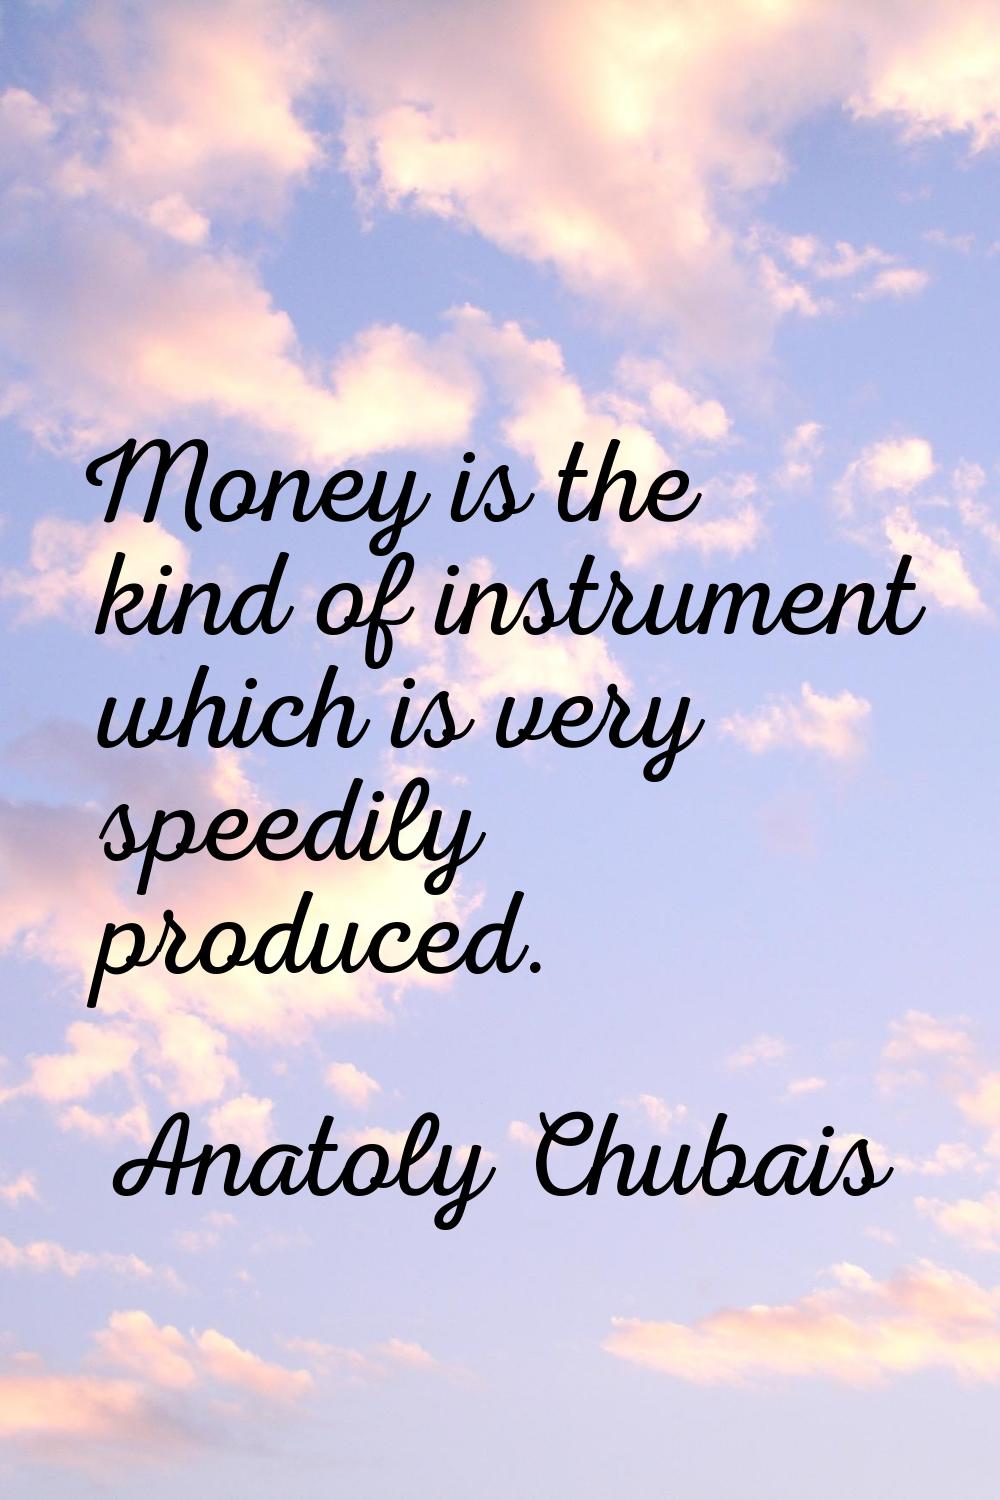 Money is the kind of instrument which is very speedily produced.